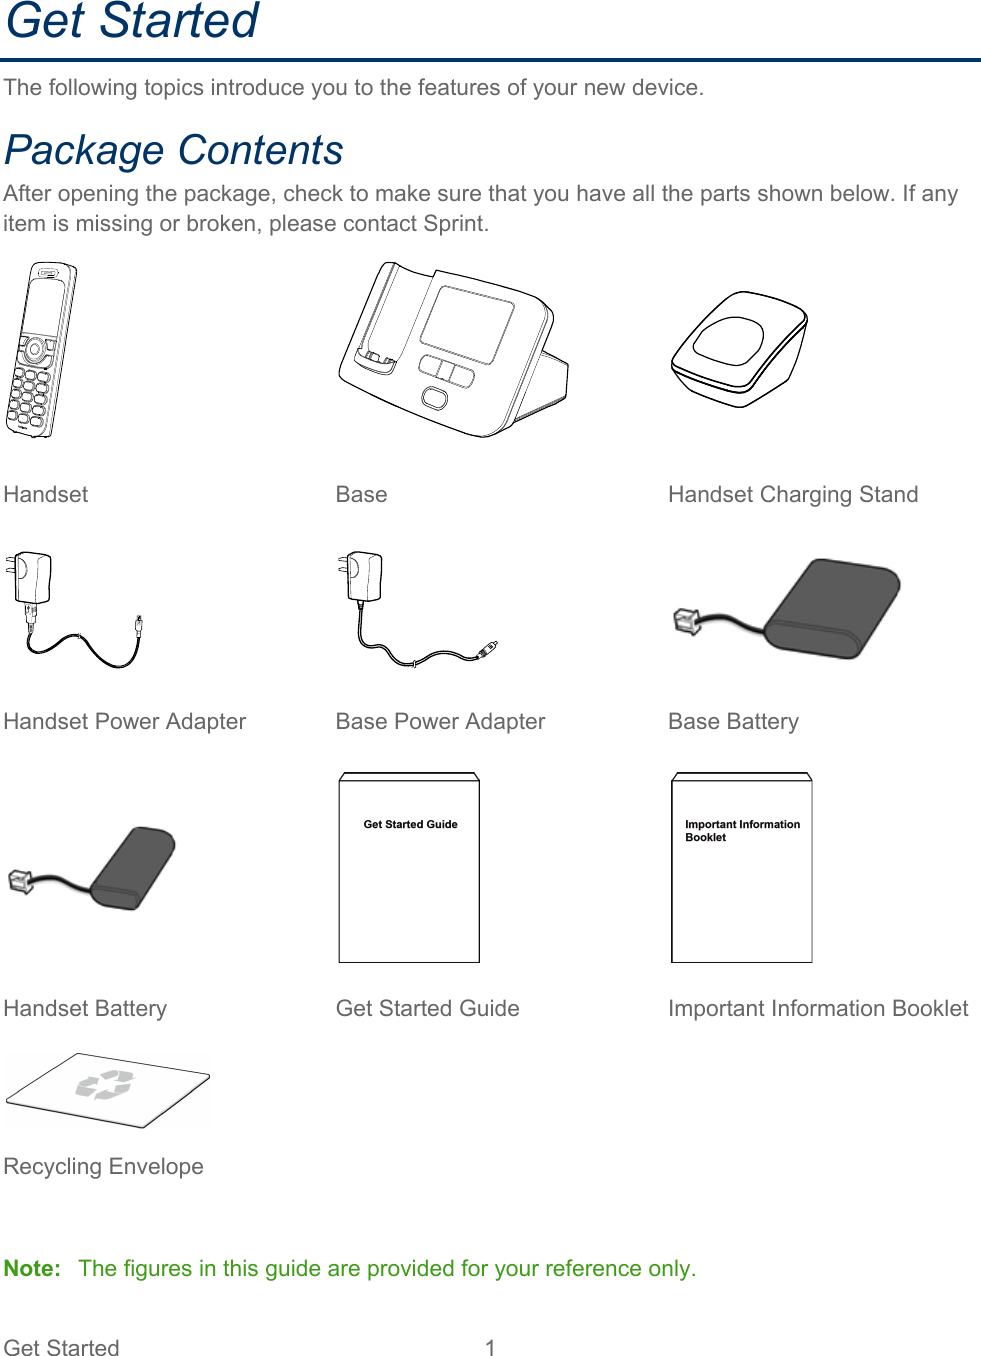 Get Started  1   Get Started The following topics introduce you to the features of your new device. Package Contents After opening the package, check to make sure that you have all the parts shown below. If any item is missing or broken, please contact Sprint.     Handset  Base  Handset Charging Stand      Handset Power Adapter Base Power Adapter Base Battery     Handset Battery Get Started Guide Important Information Booklet     Recycling Envelope    Note:   The figures in this guide are provided for your reference only. 